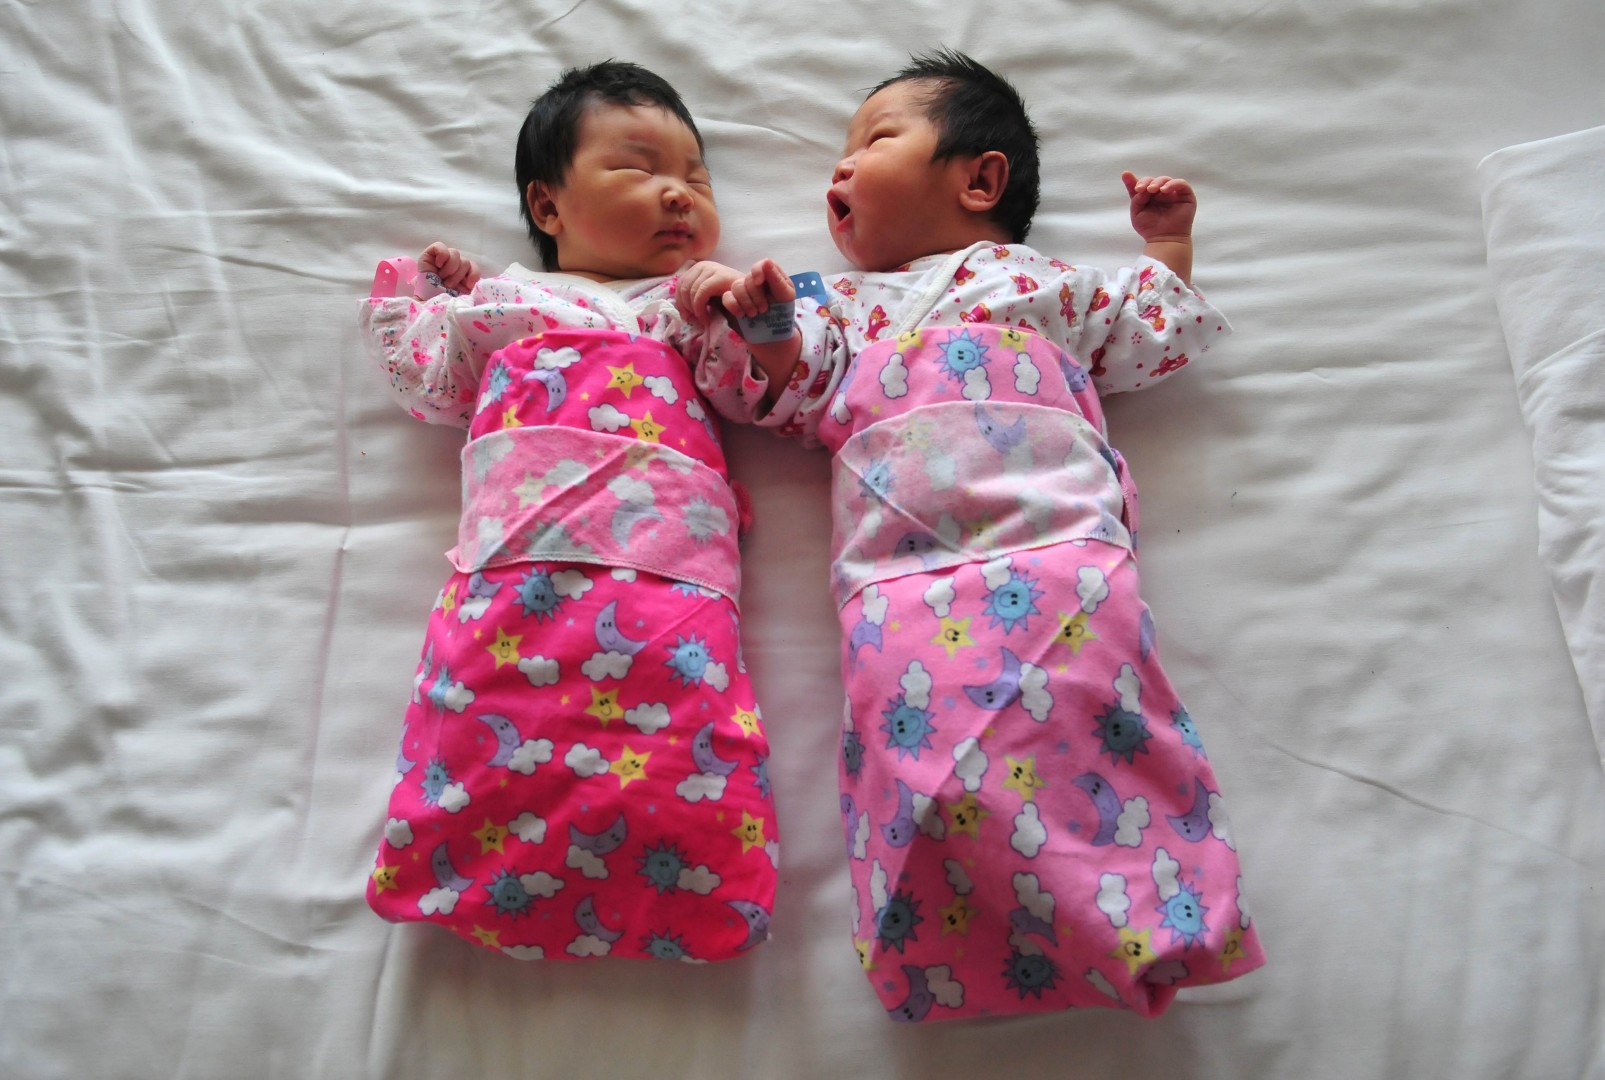 Toddler Lesbian Porn - End of China's one-child policy will ease pressure on gays ...